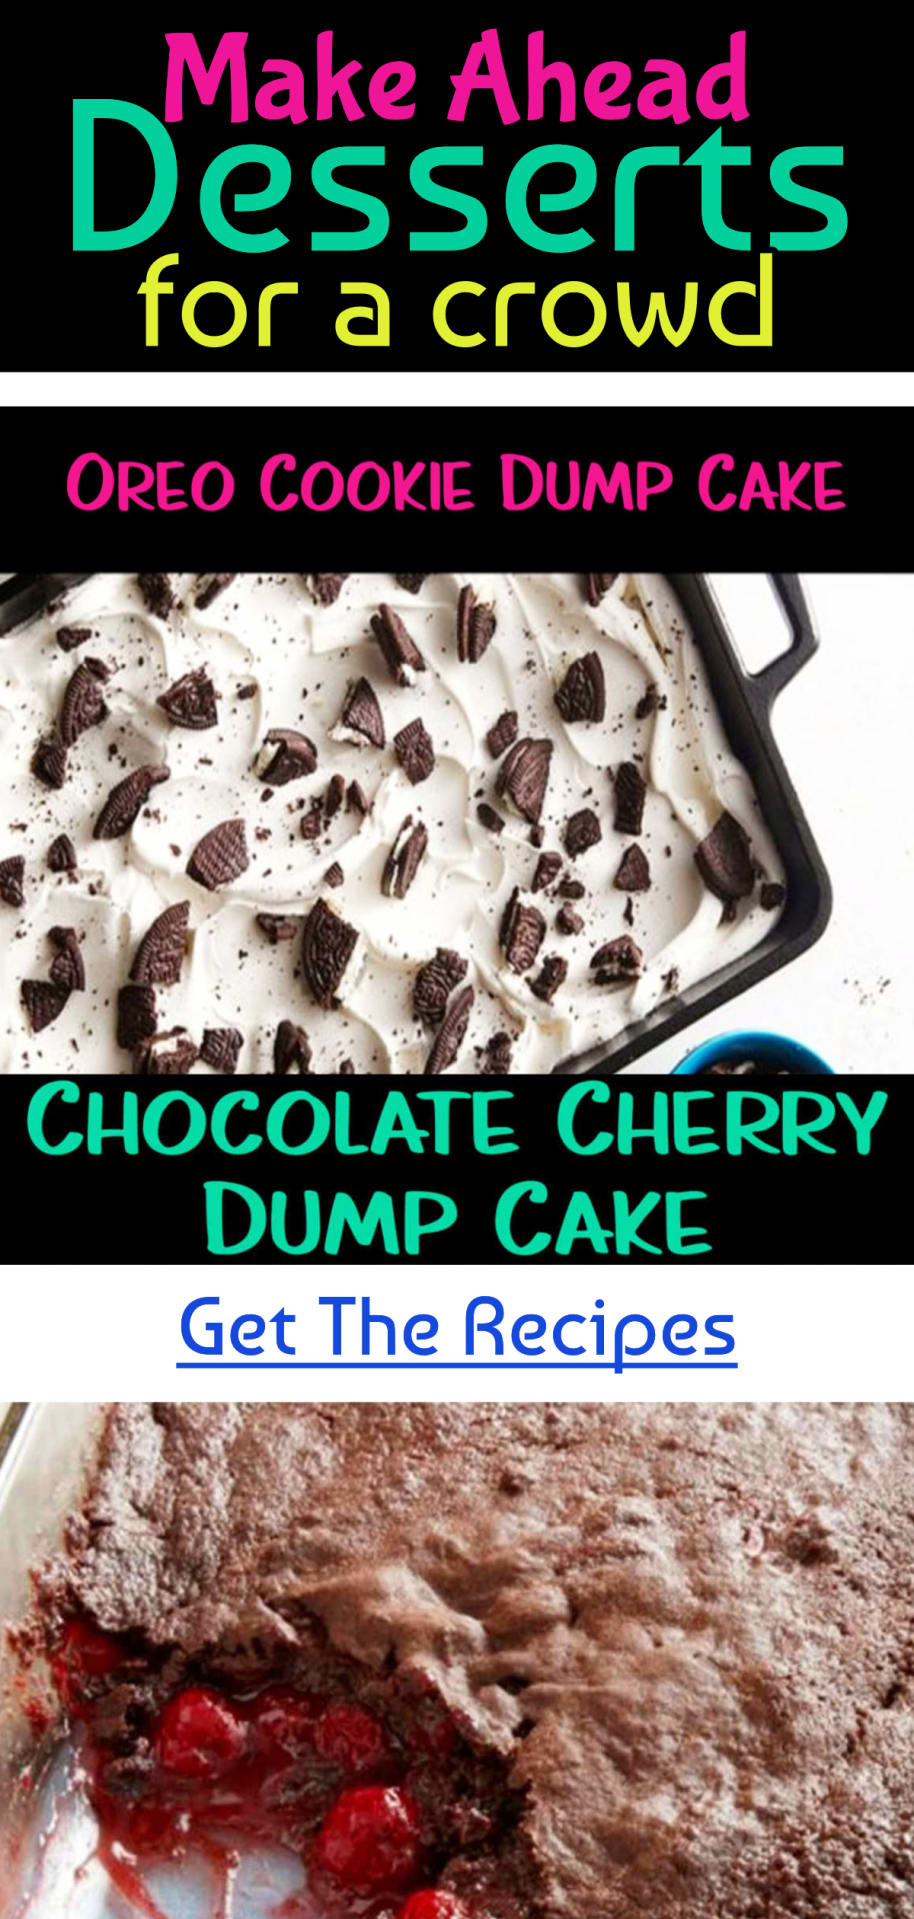 Super simple desserts - easy 3 ingredients desserts - sweet treats and desserts for a crowd or party - easy funeral food ideas - cheap easy dessert for a crowd - easy cake mix desserts - super simple chocolate desserts and cherry pie filling recipes - family reunion food ideas for feeding a crowd - make ahead desserts for a crowd